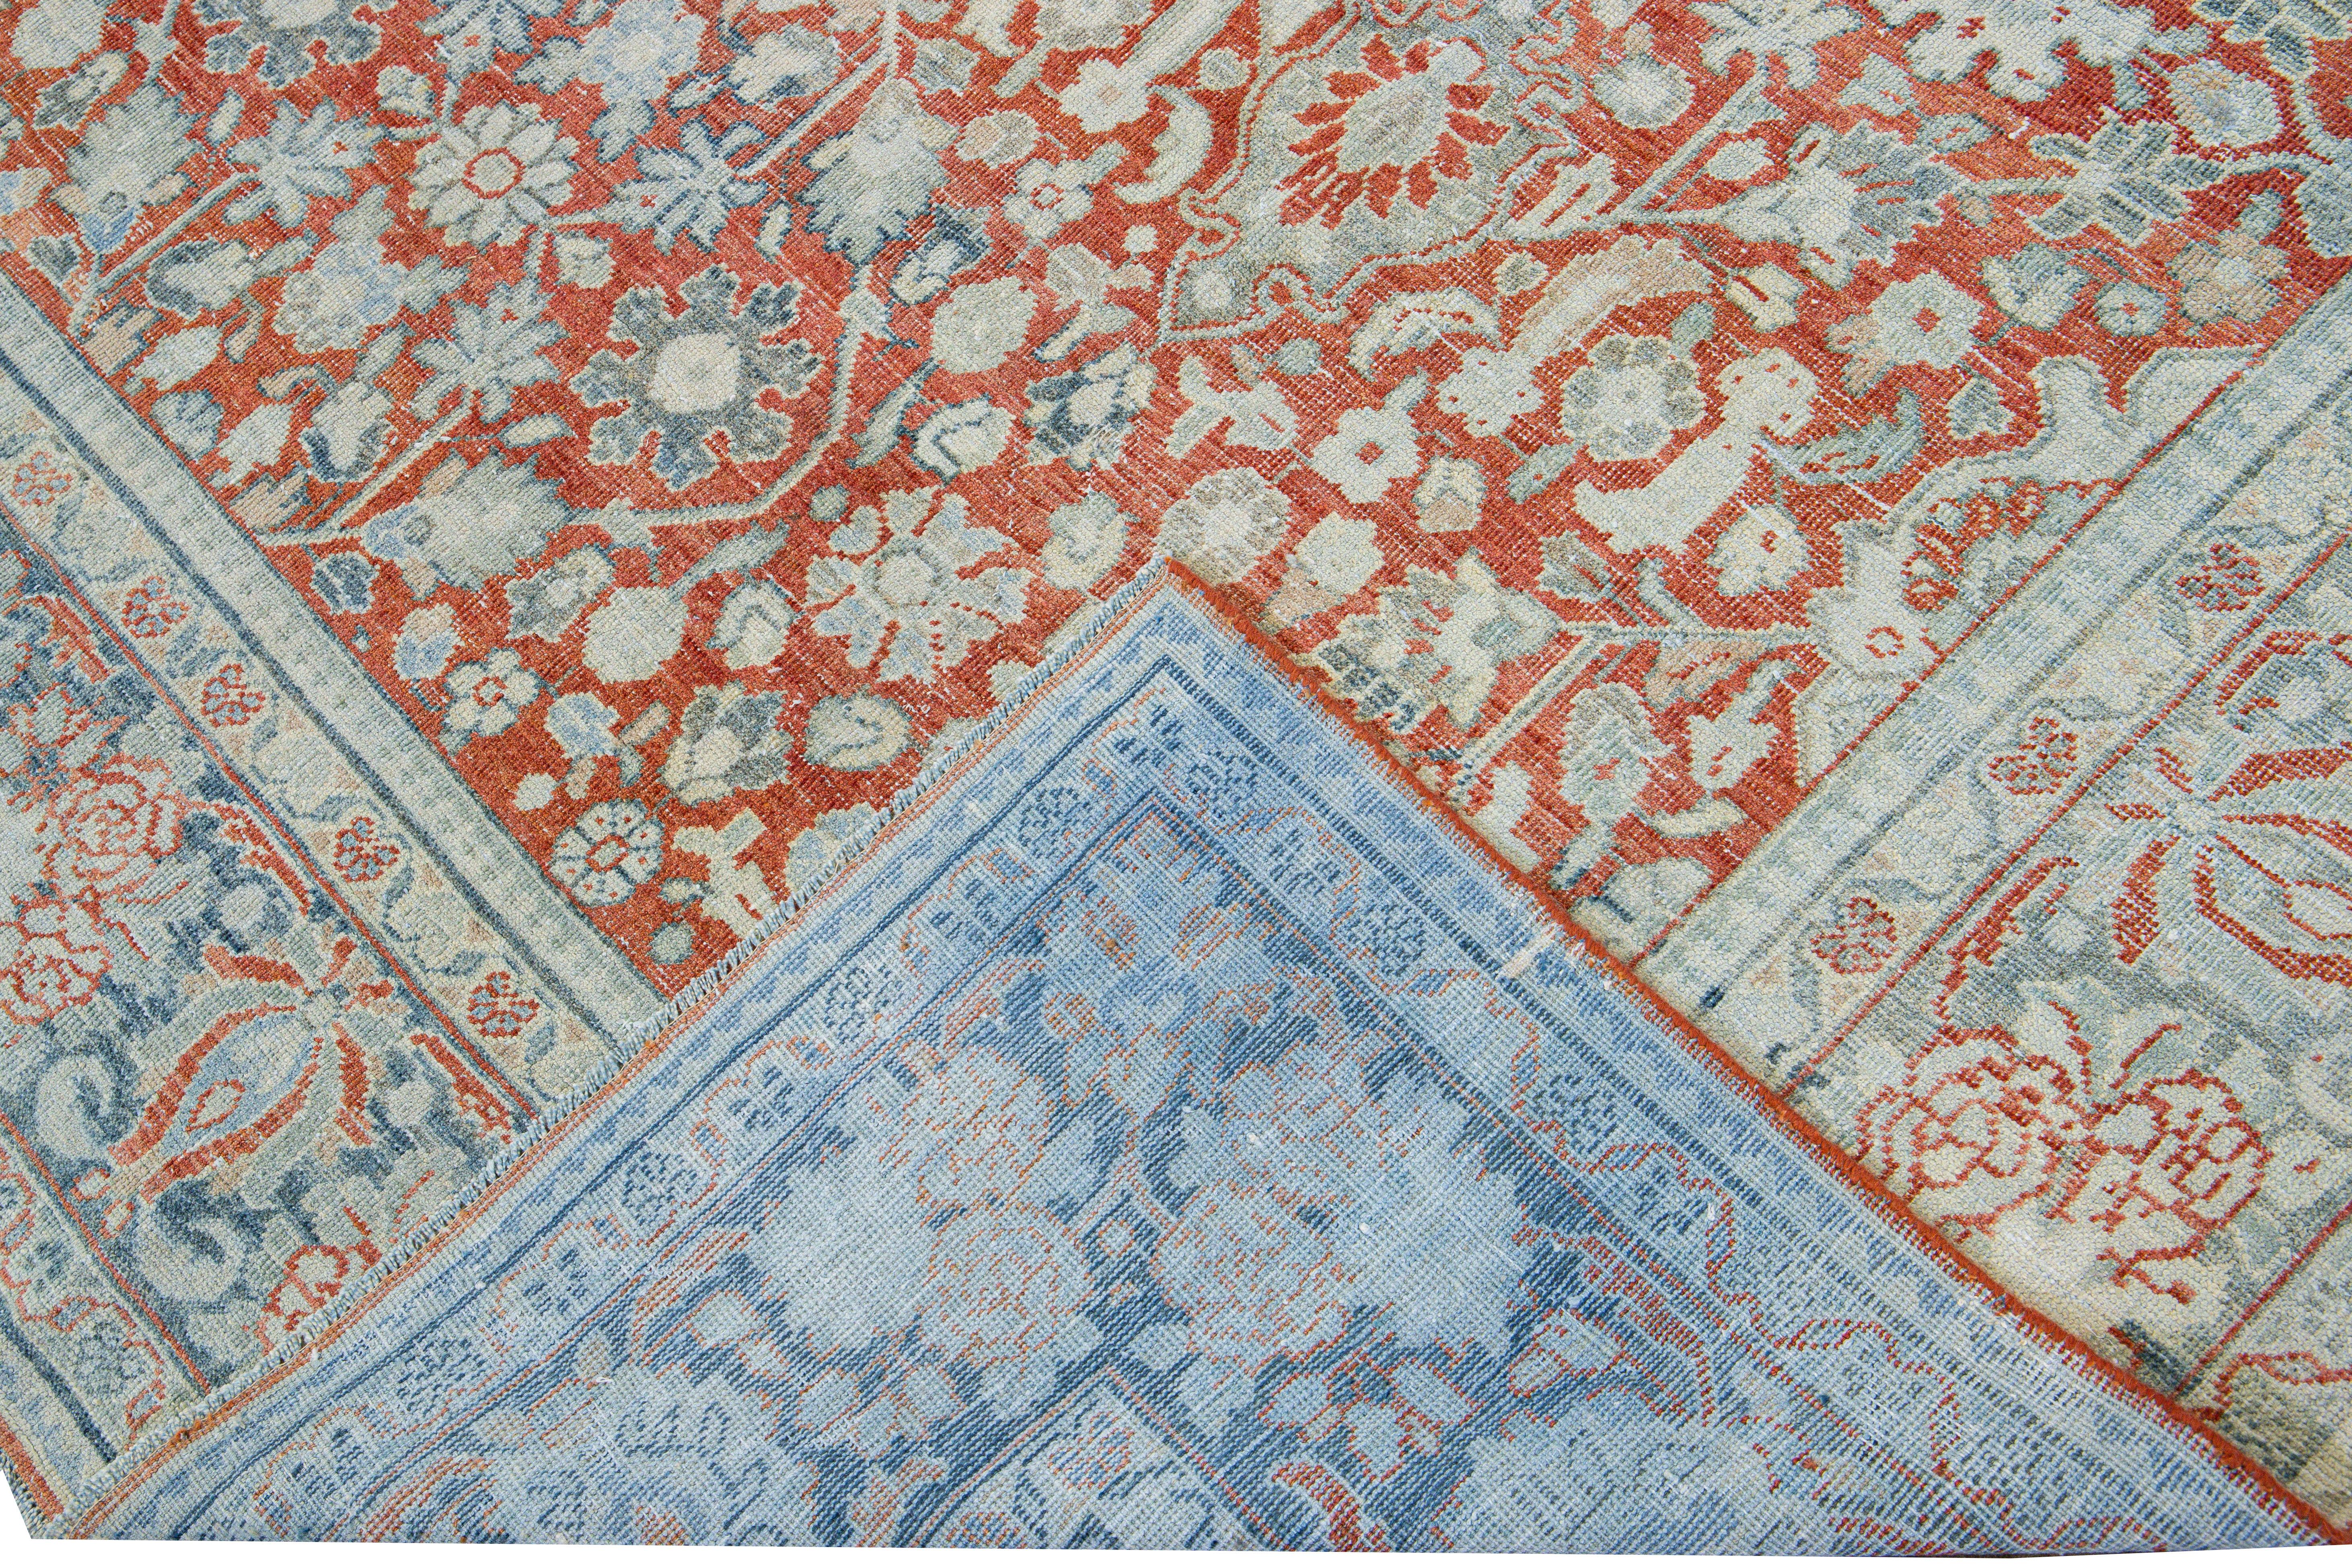 Beautiful hand-knotted antique Mahal wool rug with the red field. This Persian rug has a blue frame and ivory accents featuring a traditional floral pattern design. 

This rug measures 8'6